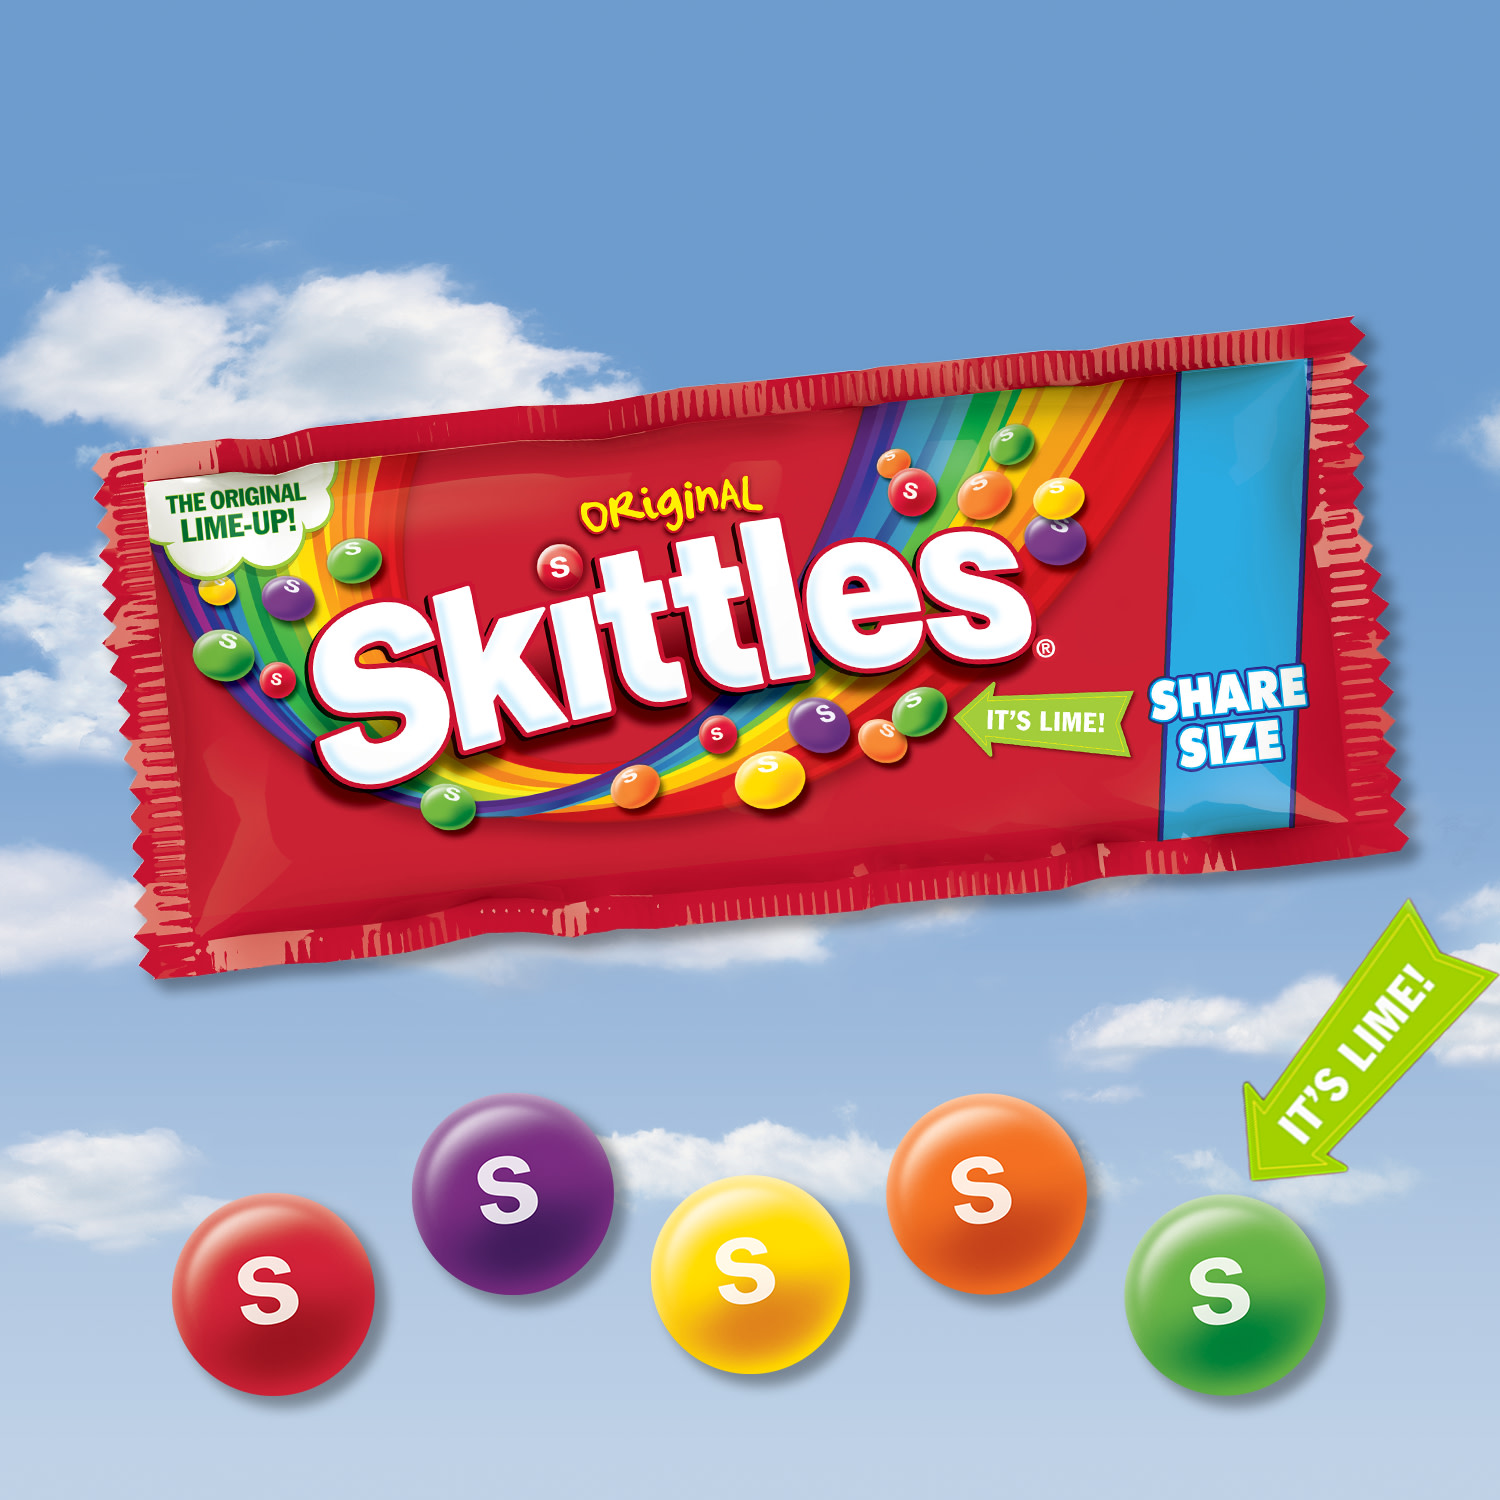 Skittles Original Chewy Candy, Share Size - 4 oz Bag - image 4 of 14